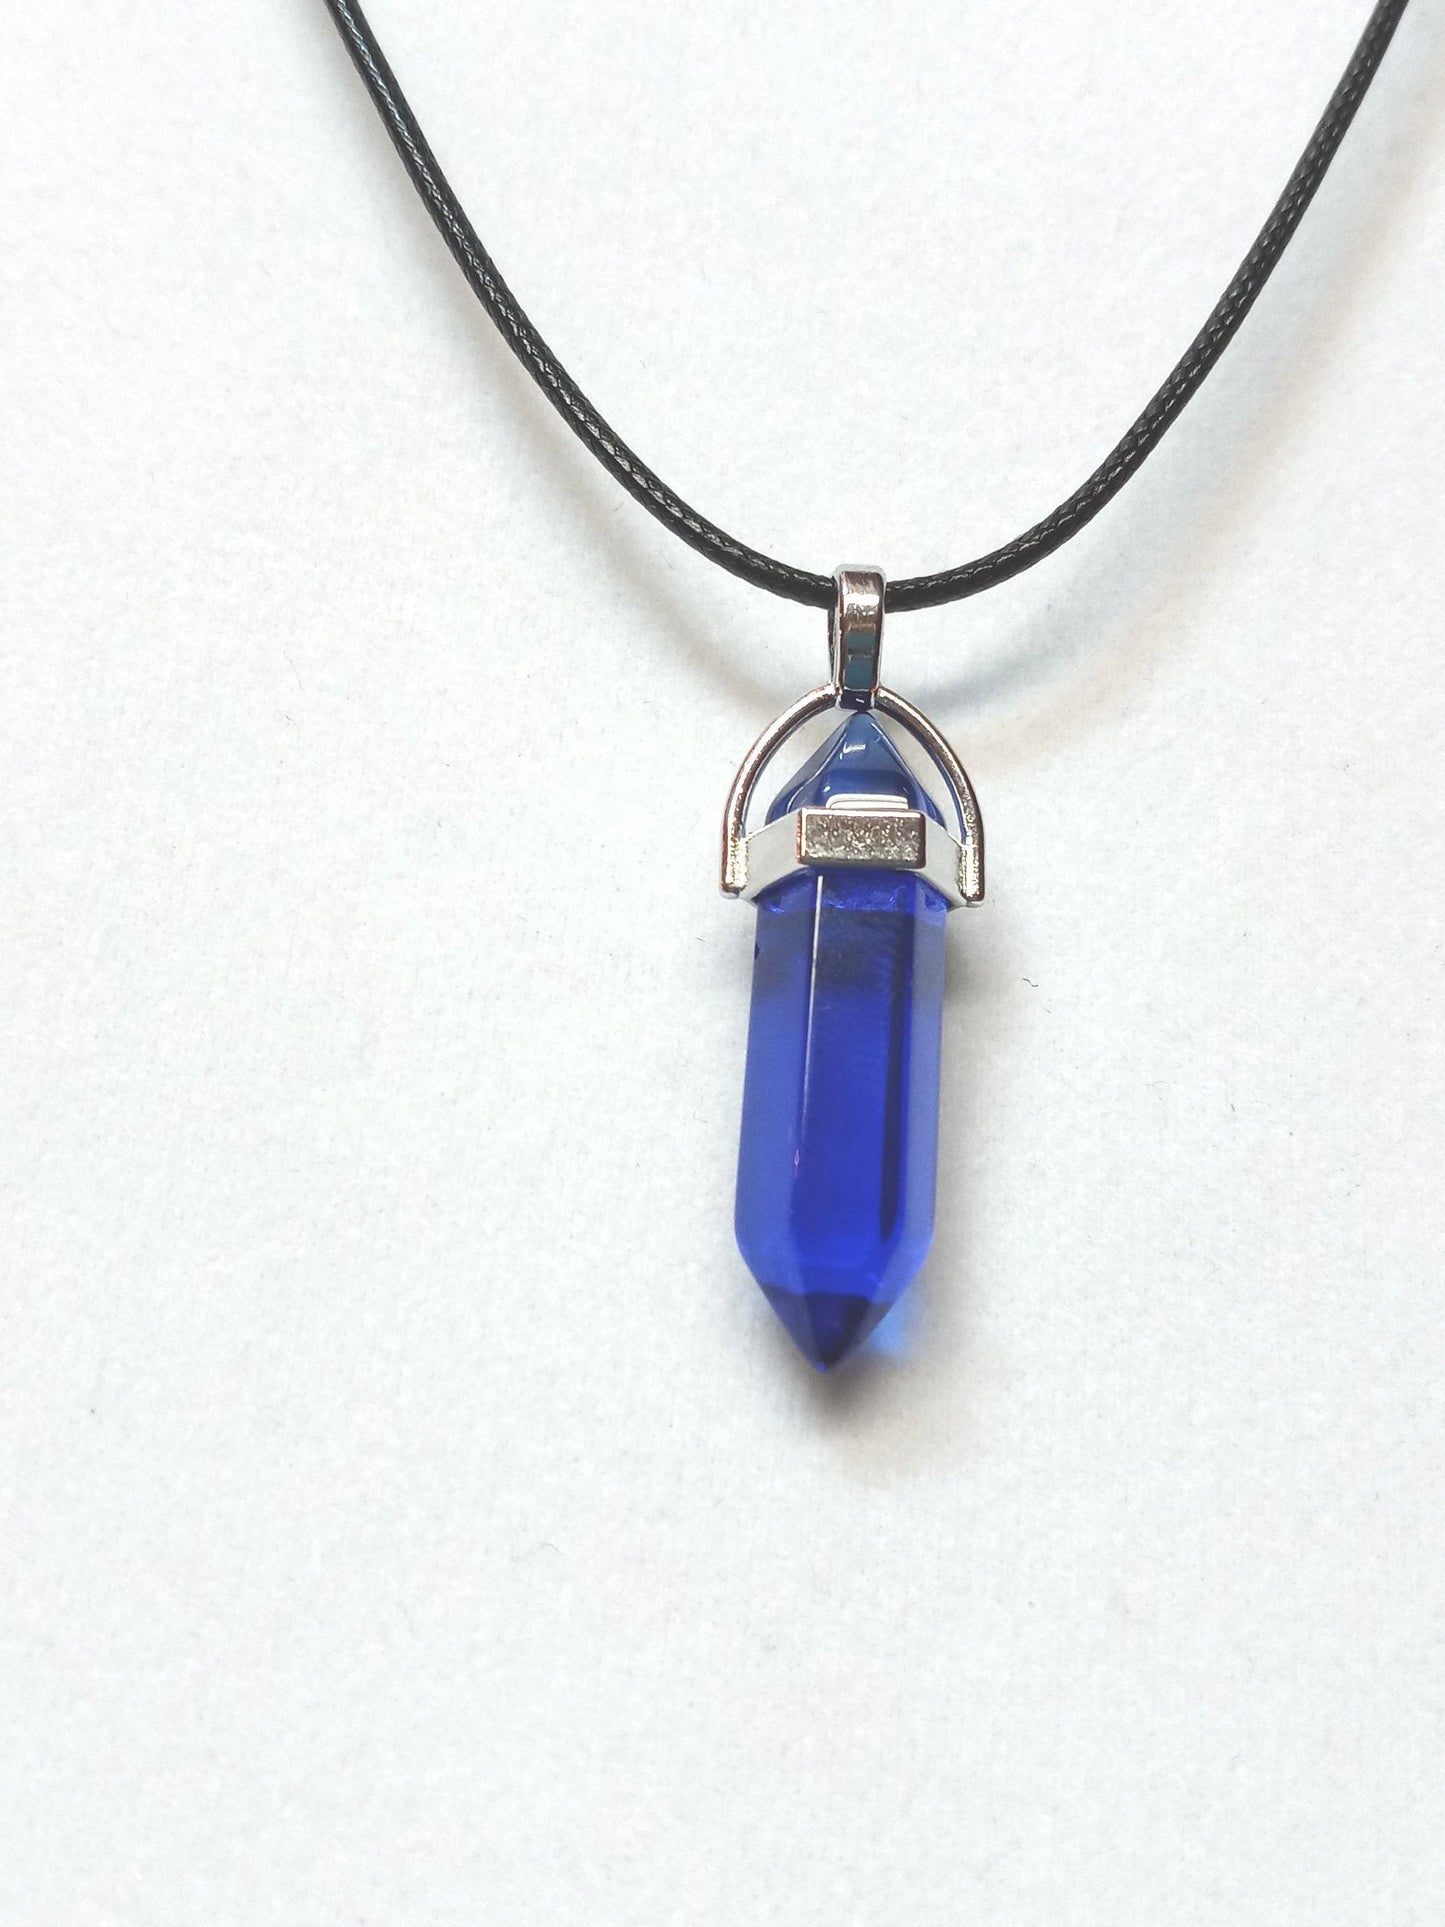 Bullet Shape Healing Stones with Black Paracord Necklace - Blue Crystal